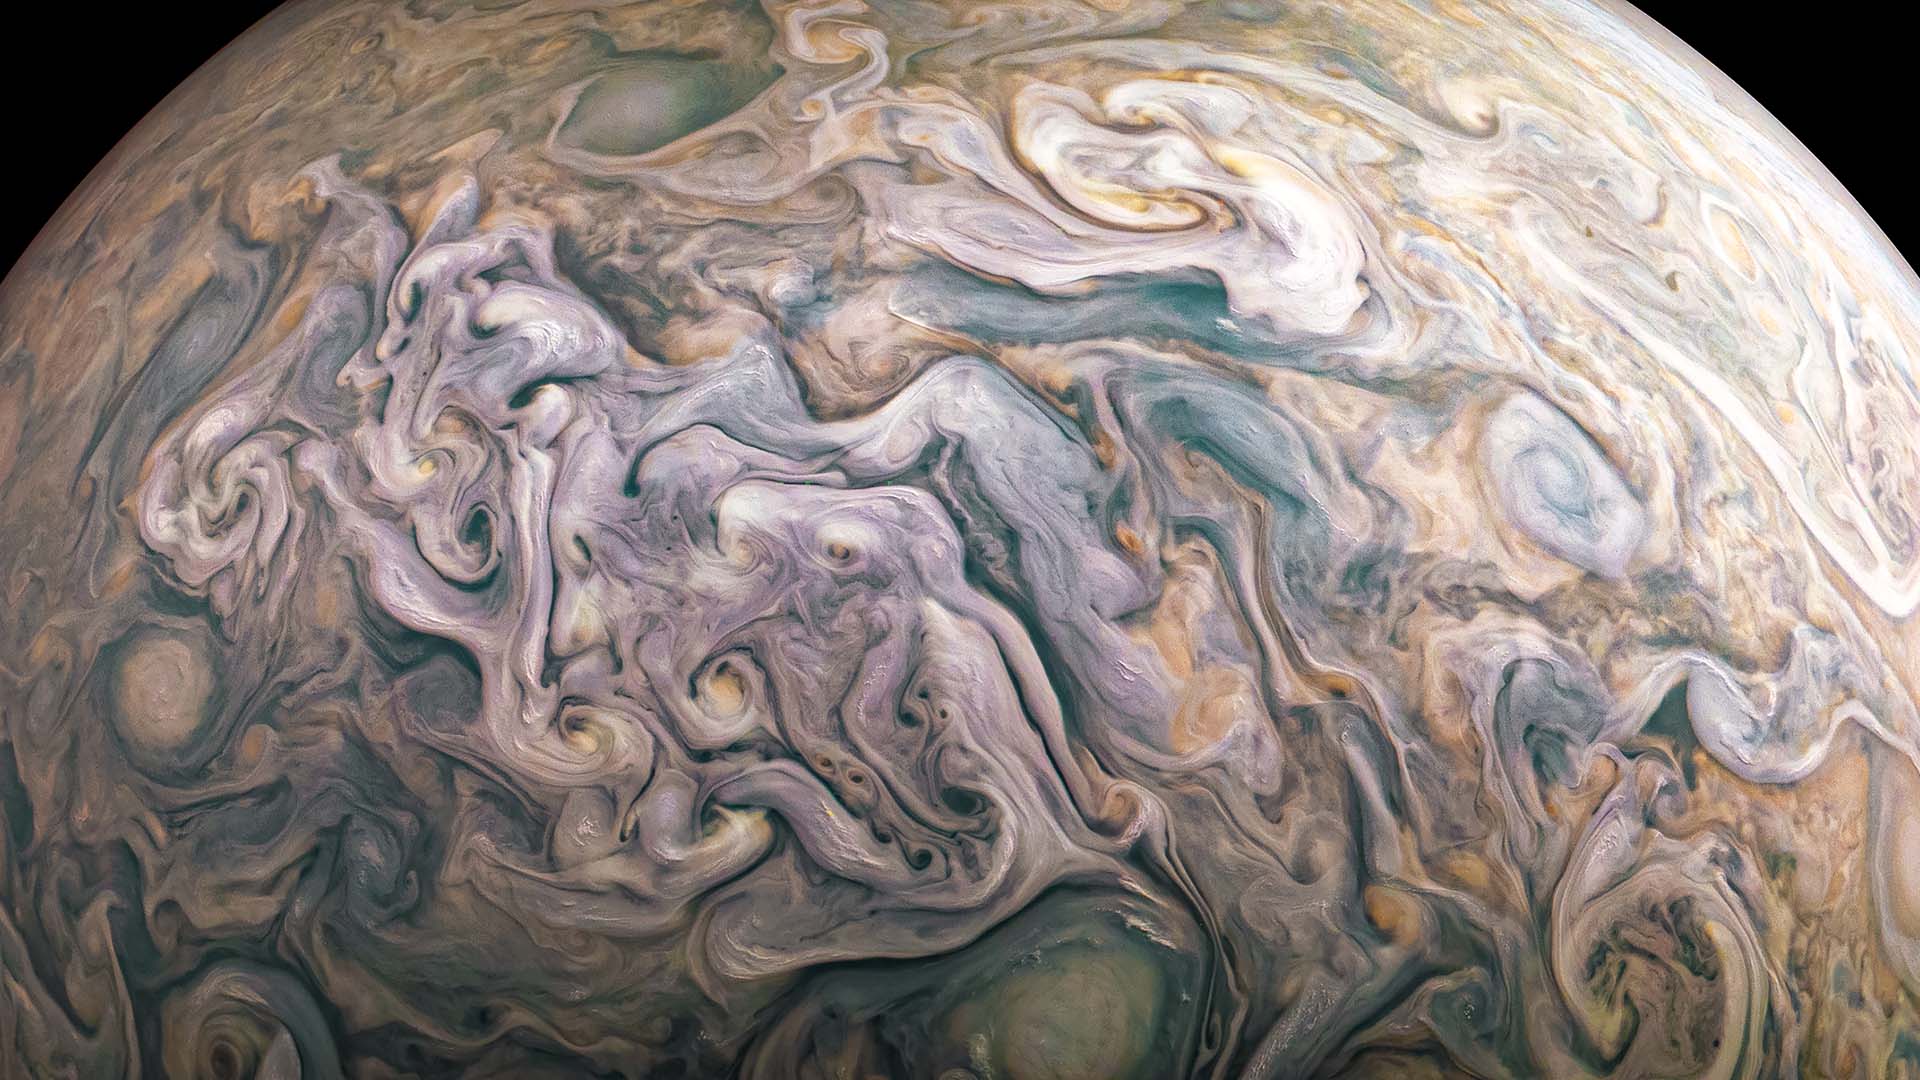 This is the noise the Juno probe made when it hit Jupiter's magnetosphere